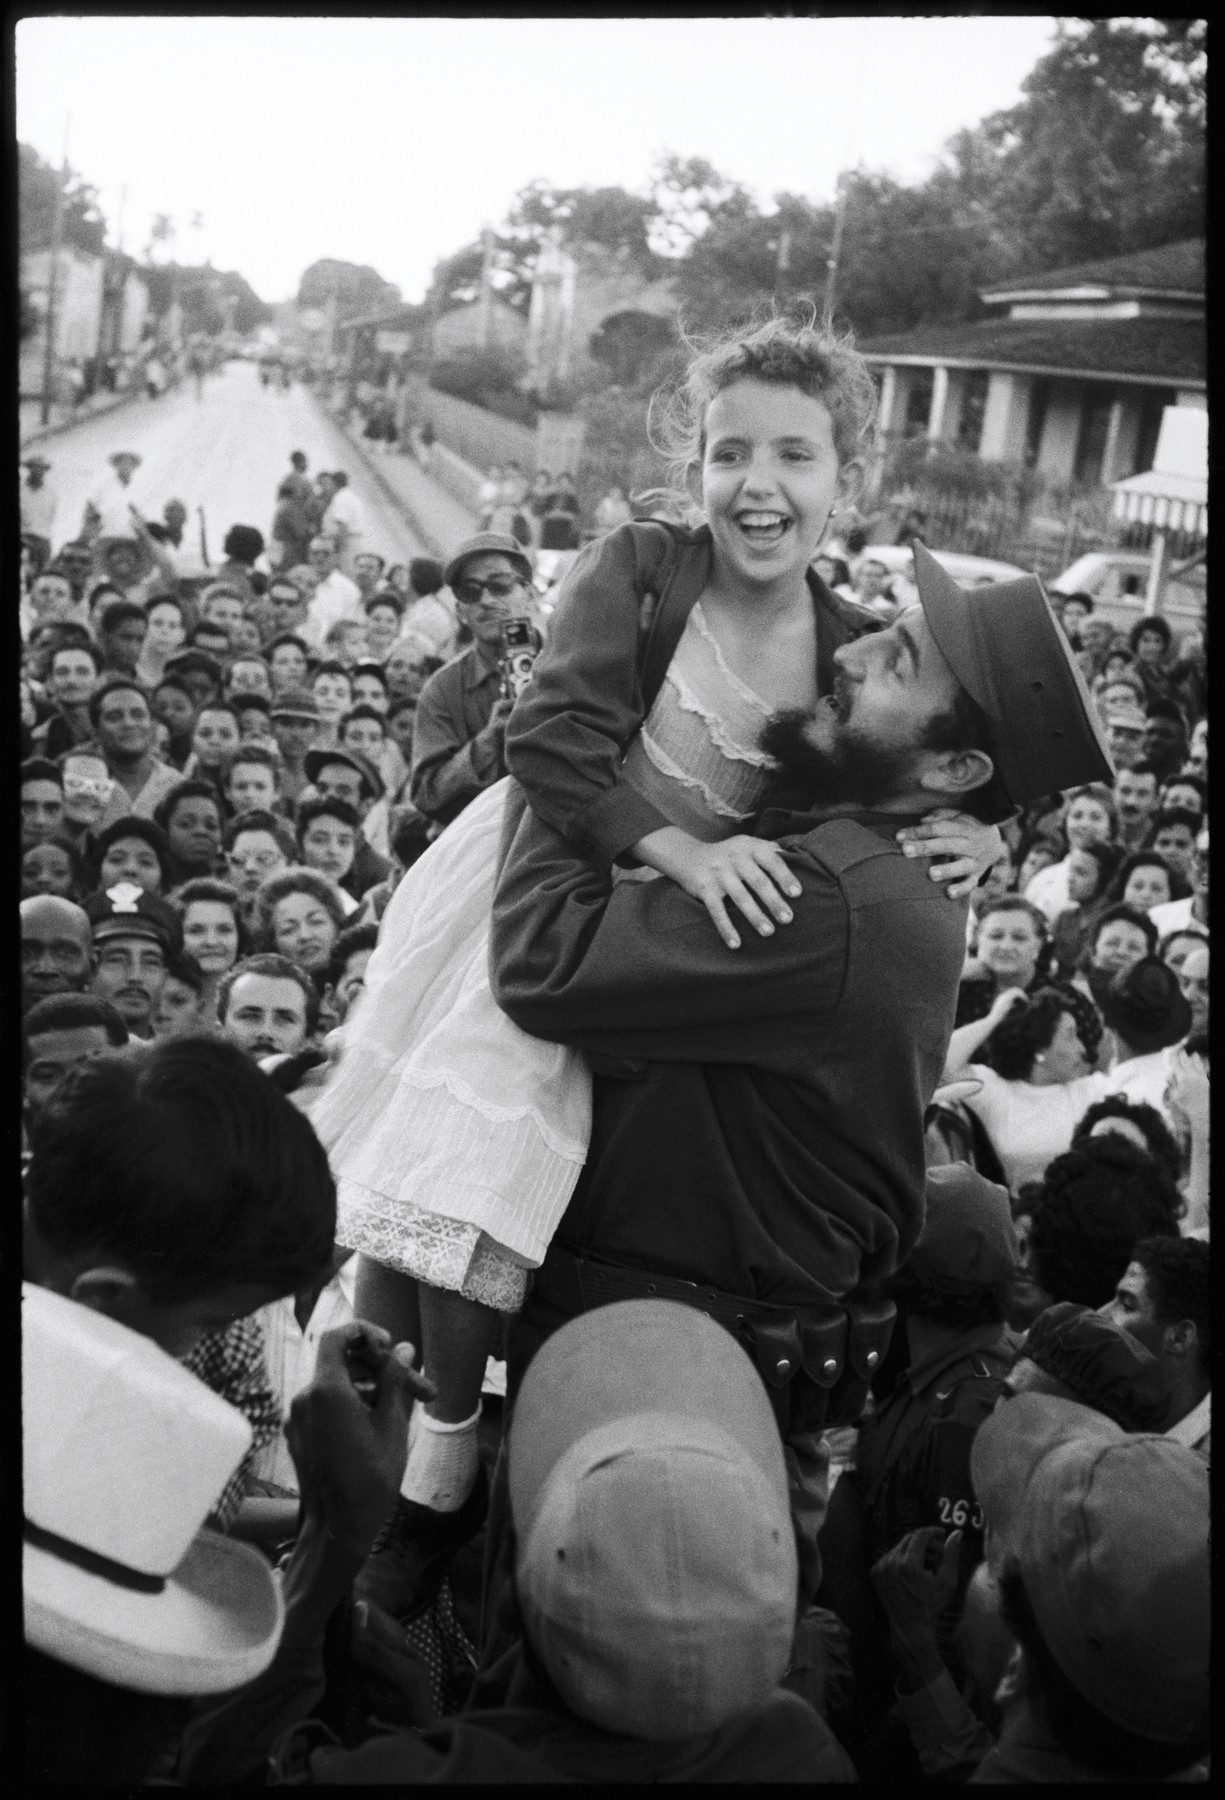 CUBA. 1959. On another stop CASTRO lifts a young admirer., Image: 190191536, License: Rights-managed, Restrictions: , Model Release: no, Credit line: Profimedia, Magnum Photos PremiumPrice Icon/Best Archive